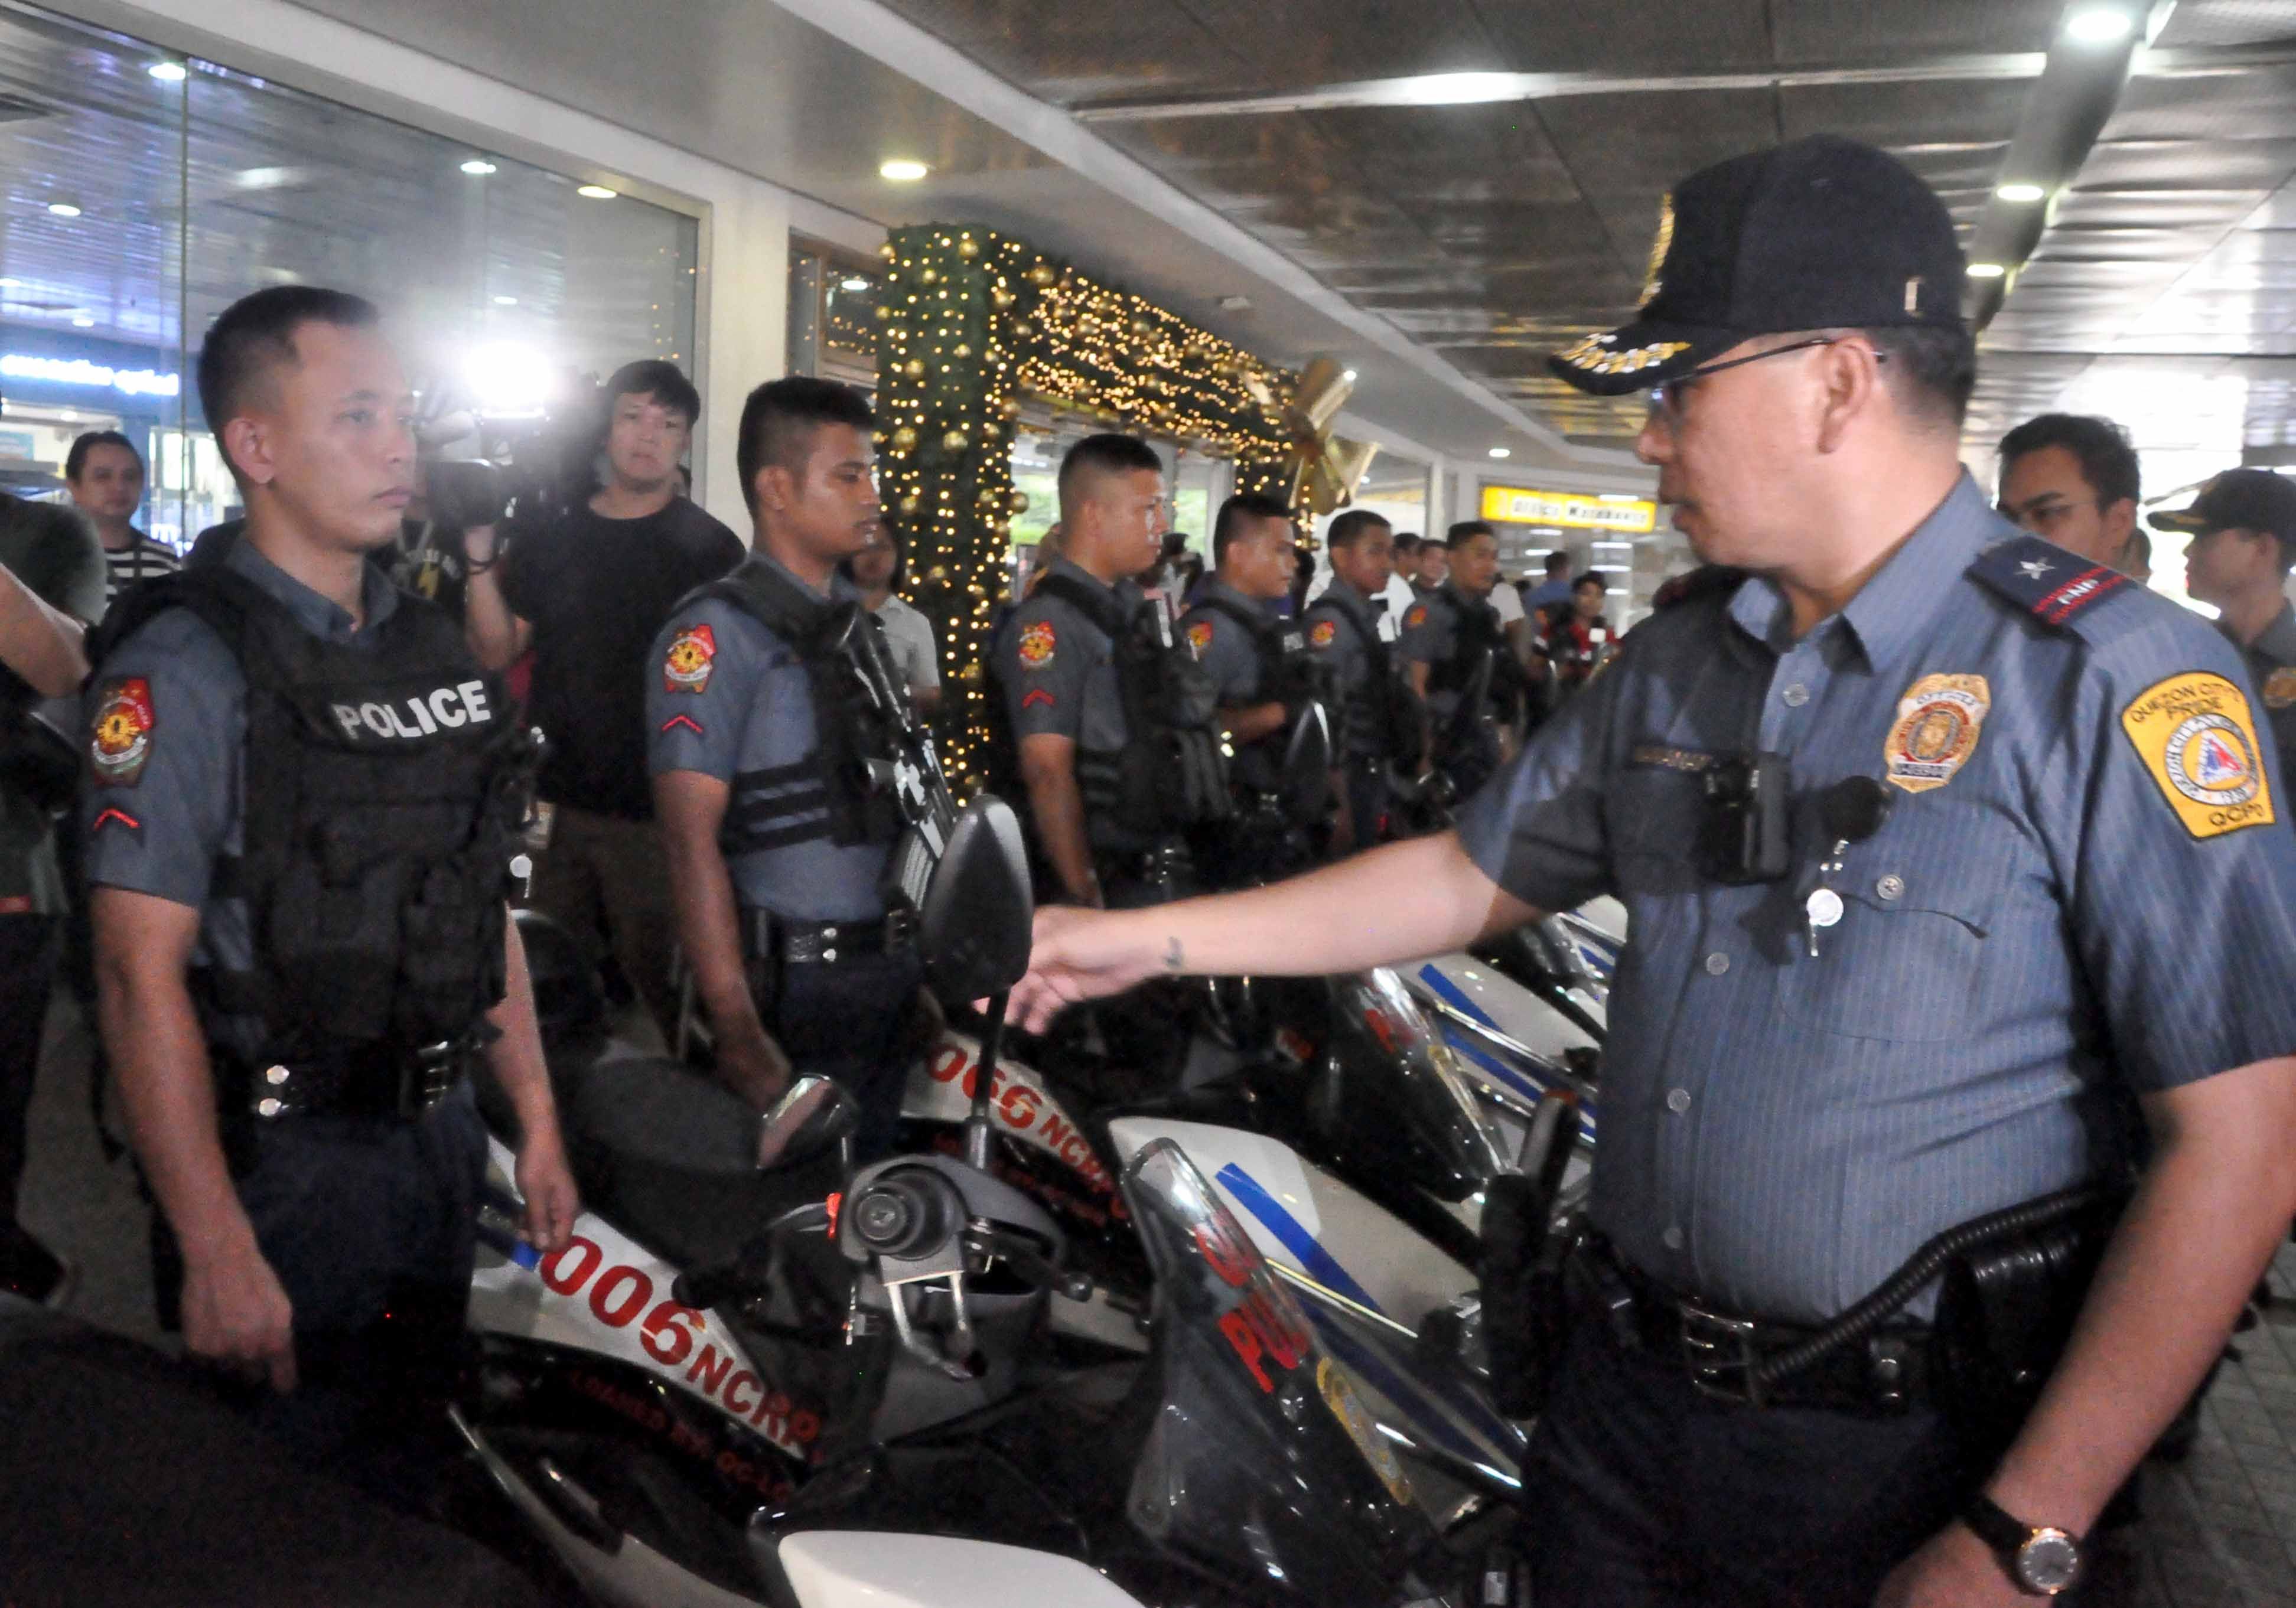 QCPD PREPARES FOR THE HOLIDAYS